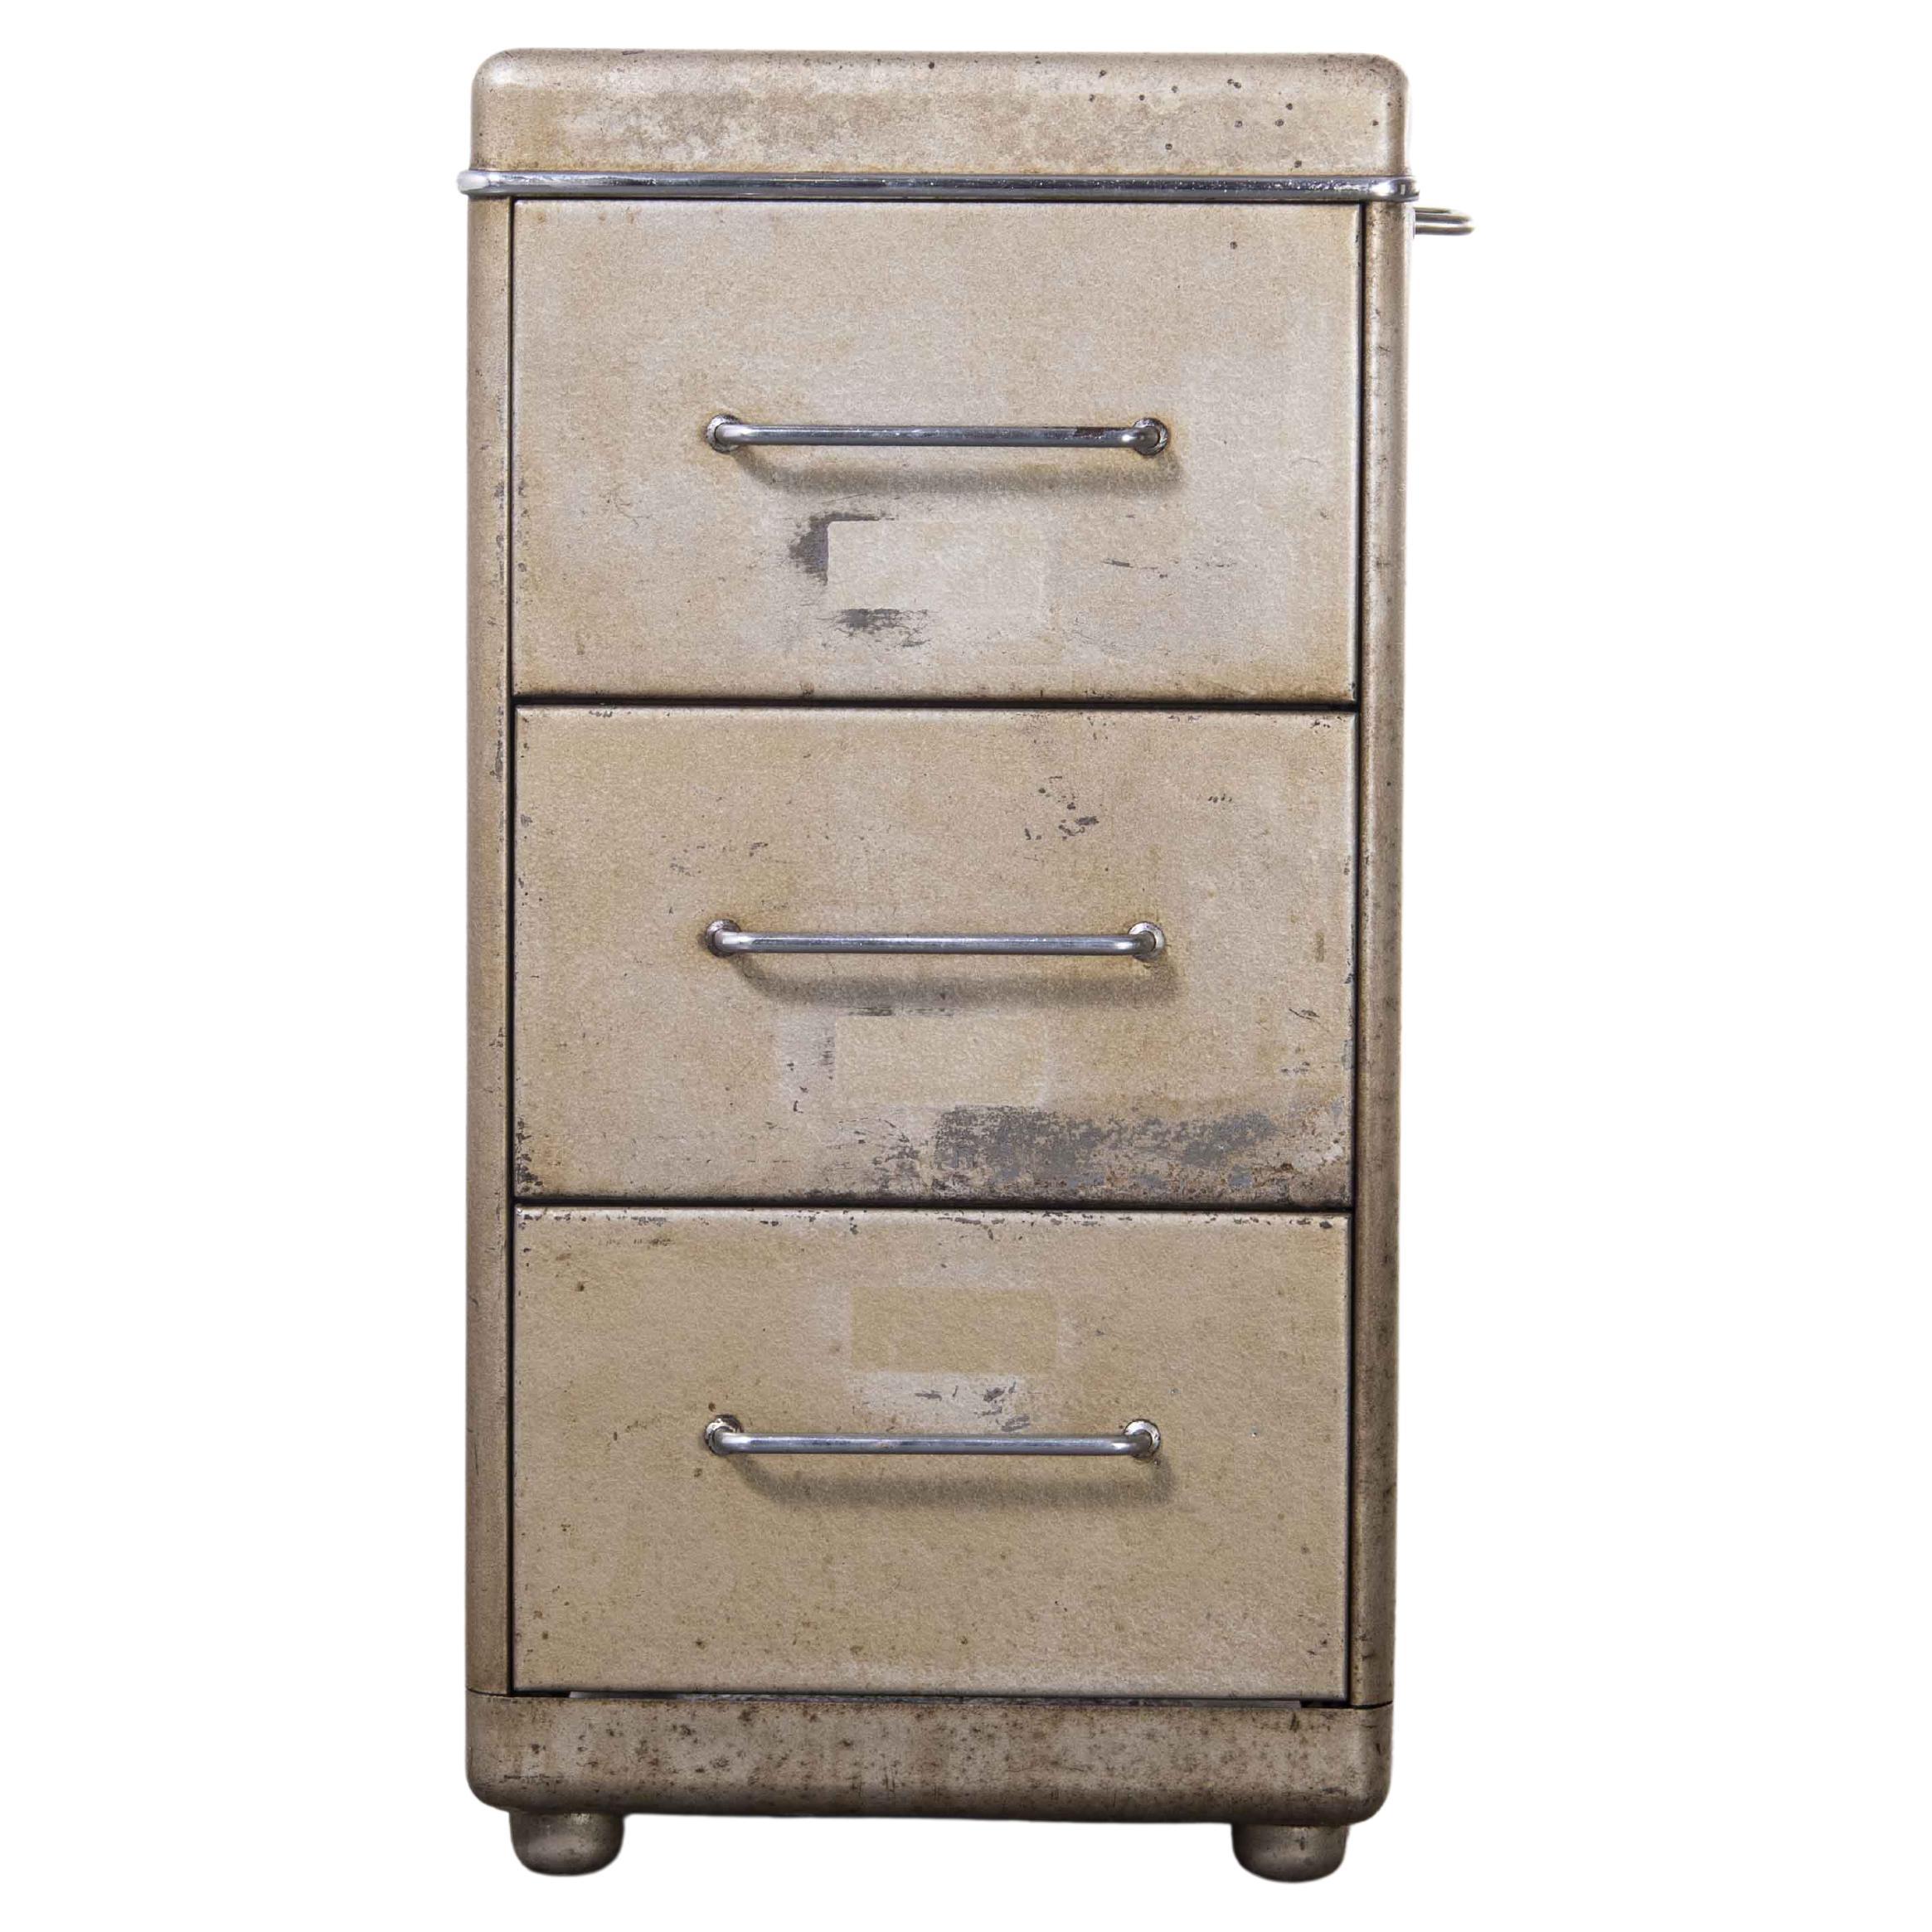 1950's Small Metal Filing Cabinet - Three Drawer